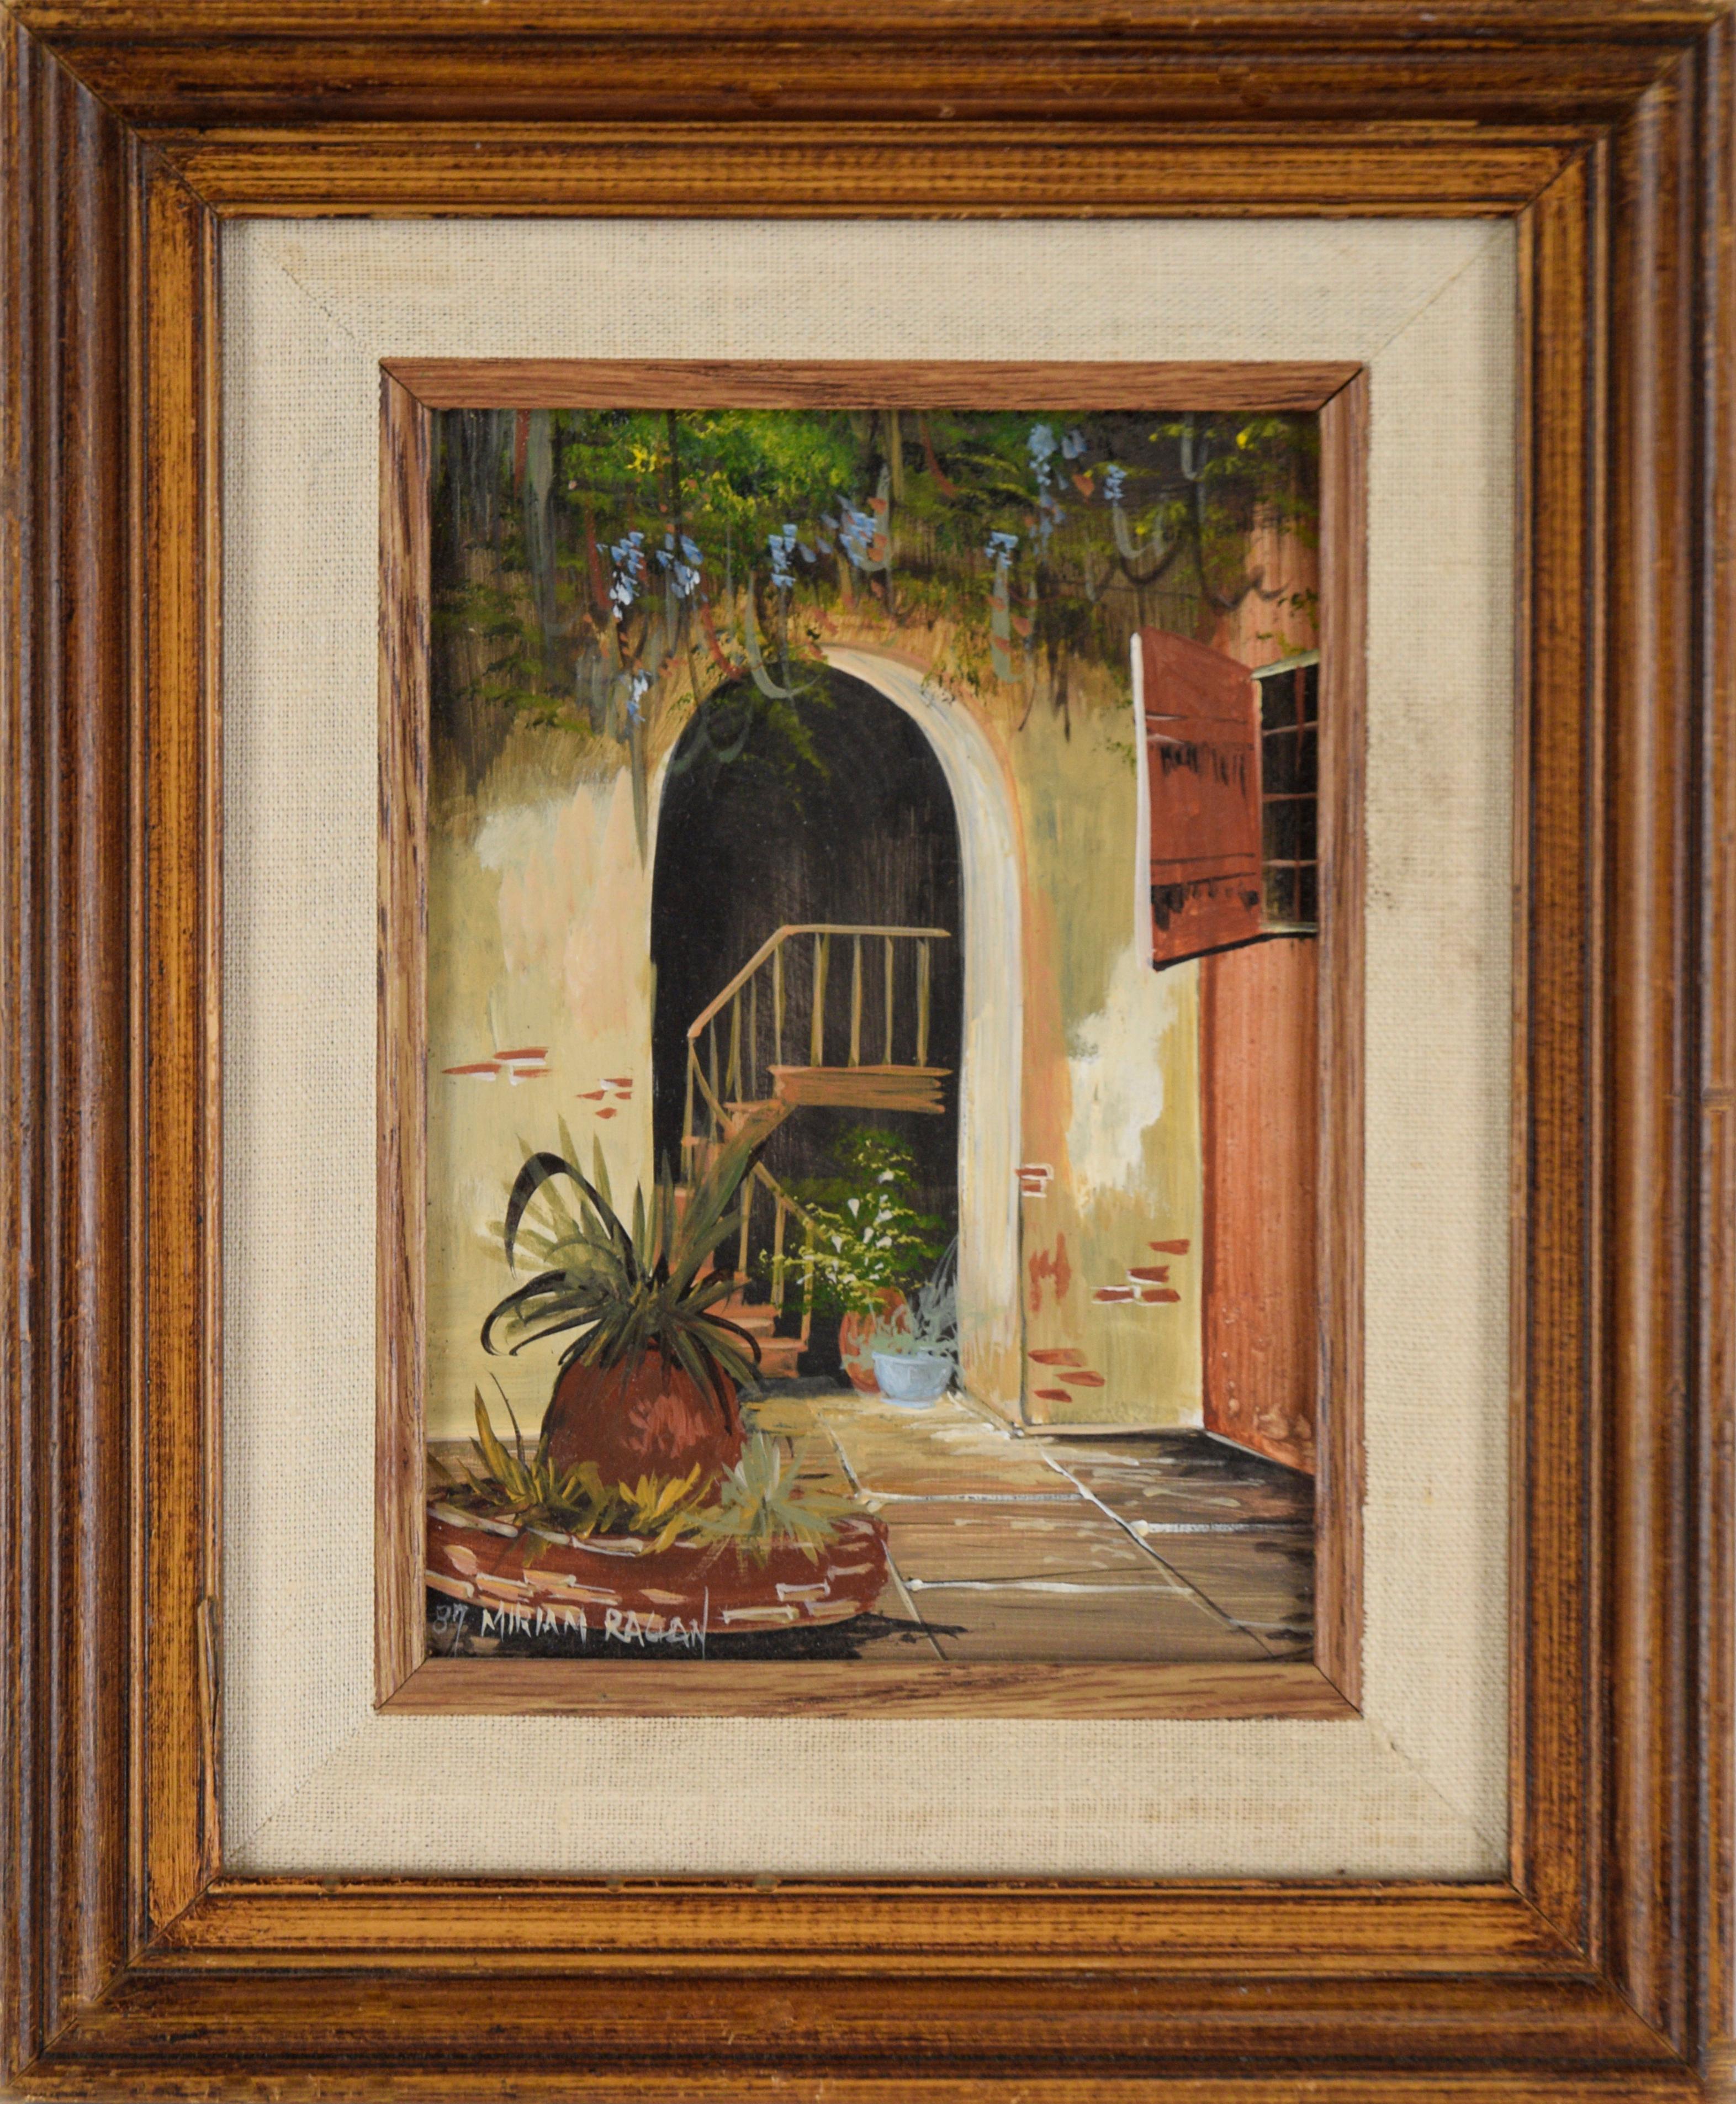 Miriam Ragan Still-Life Painting - The Staircase - The French Quarter - New Orleans Original Oil on Masonite